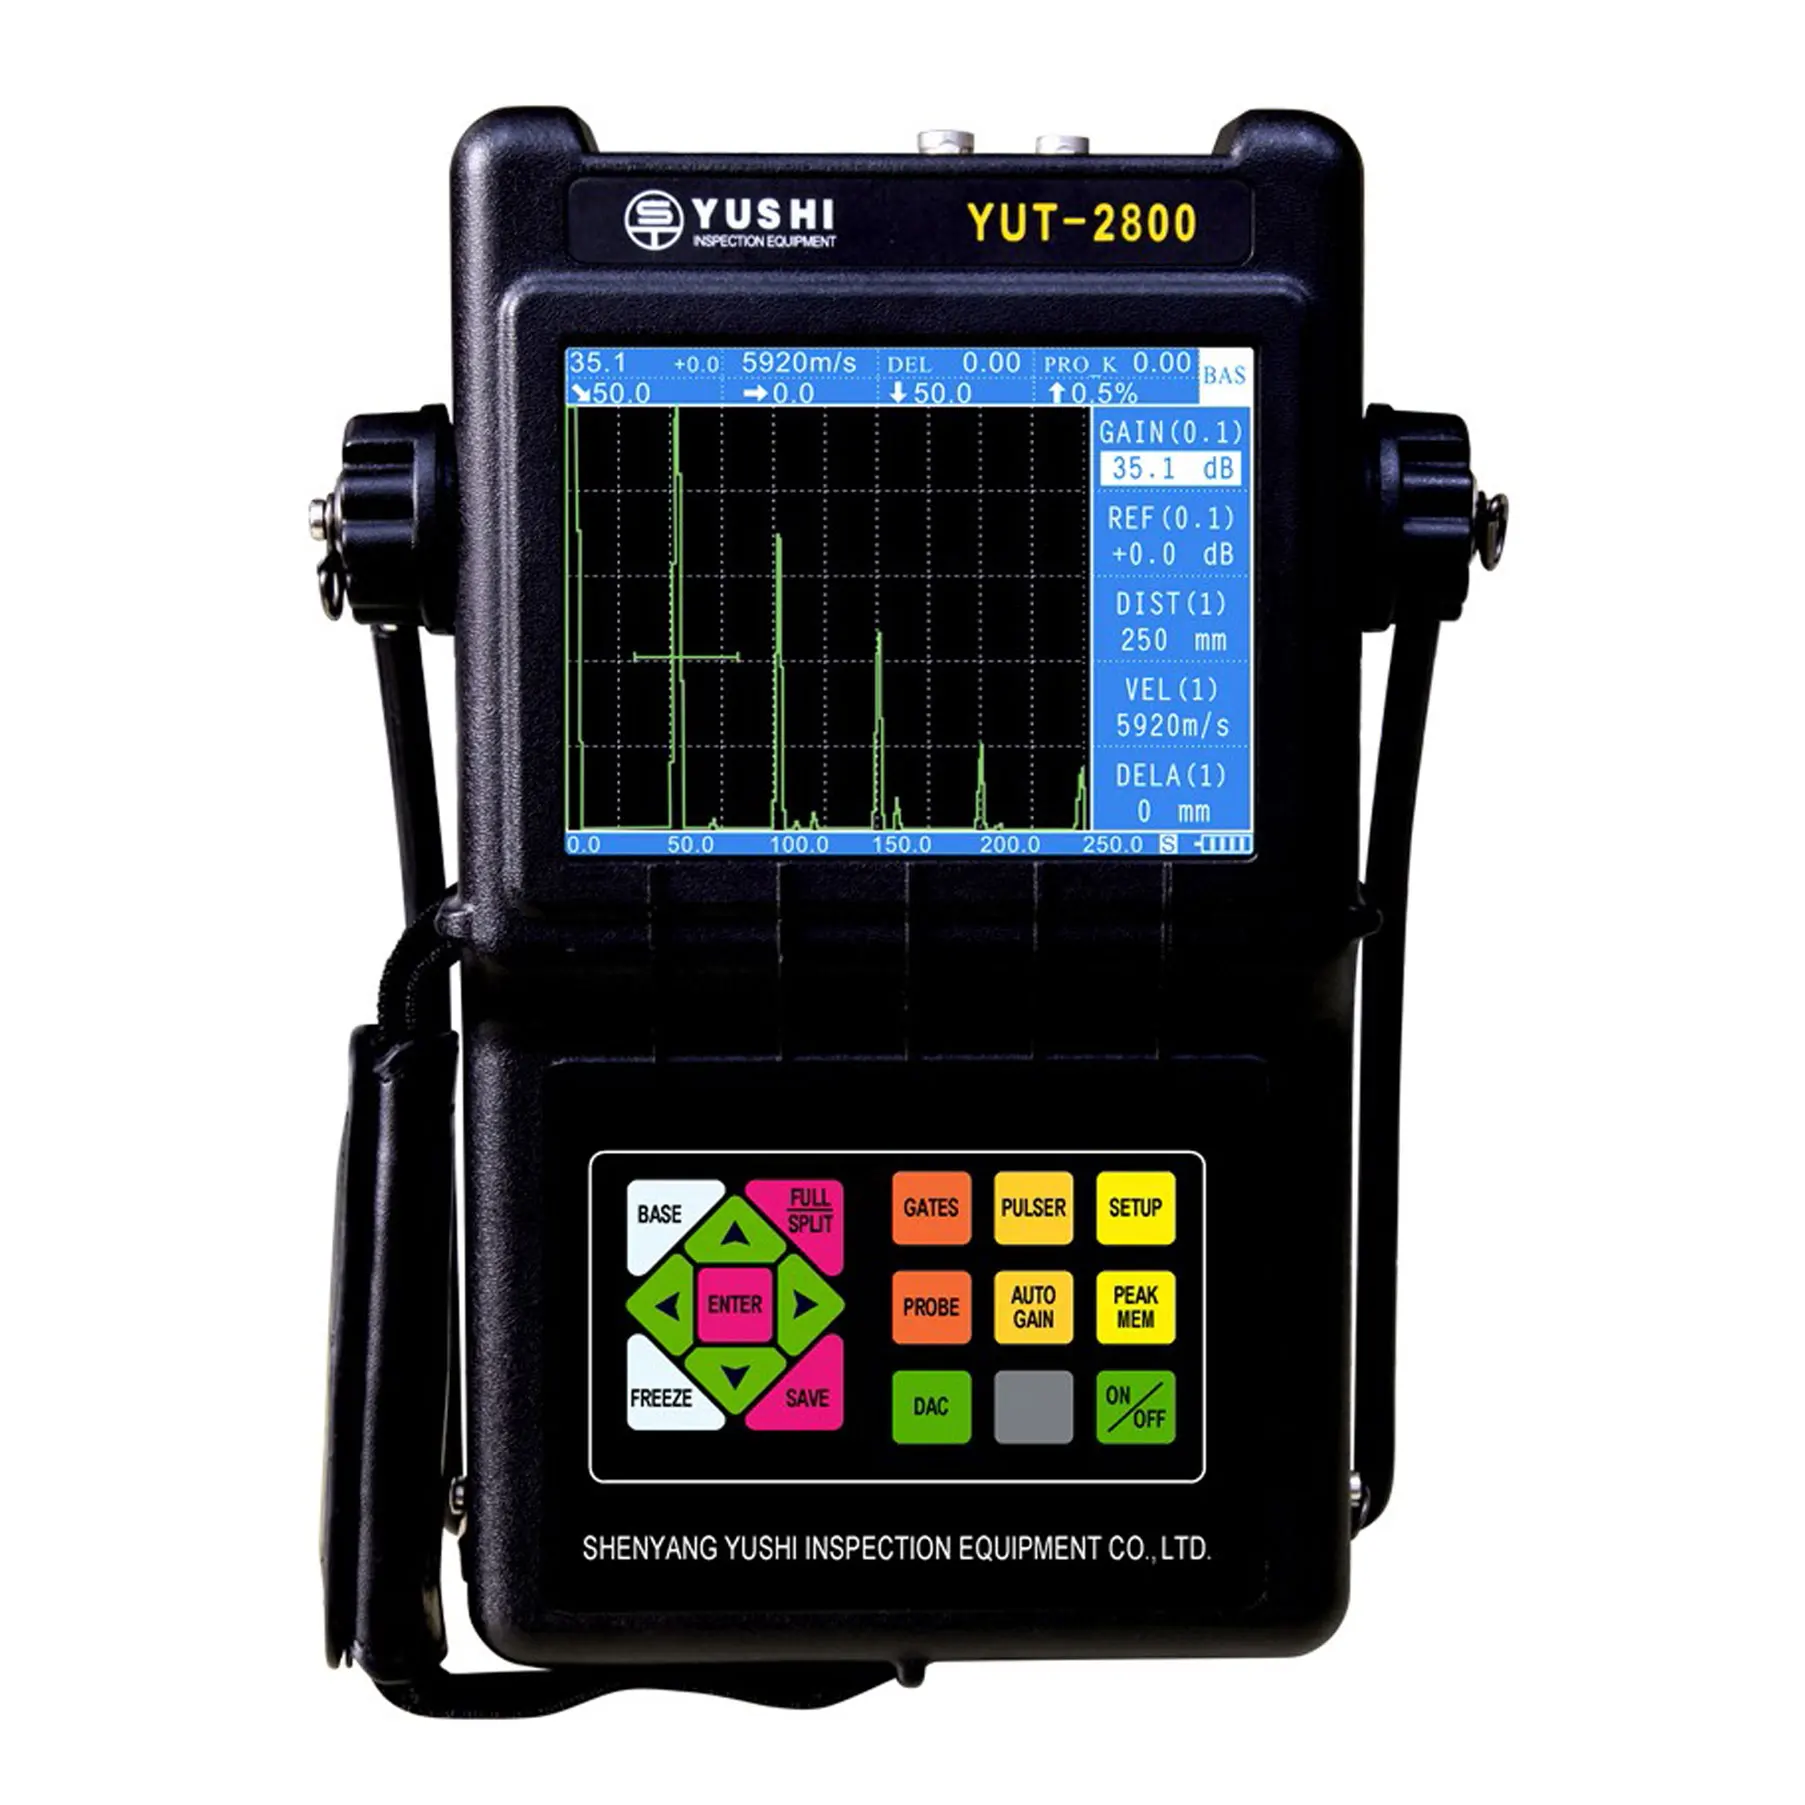 

YUT2800 Digital metal Ultrasonic Flaw Detector with Four Impedance Matching Range 0-4500 mm